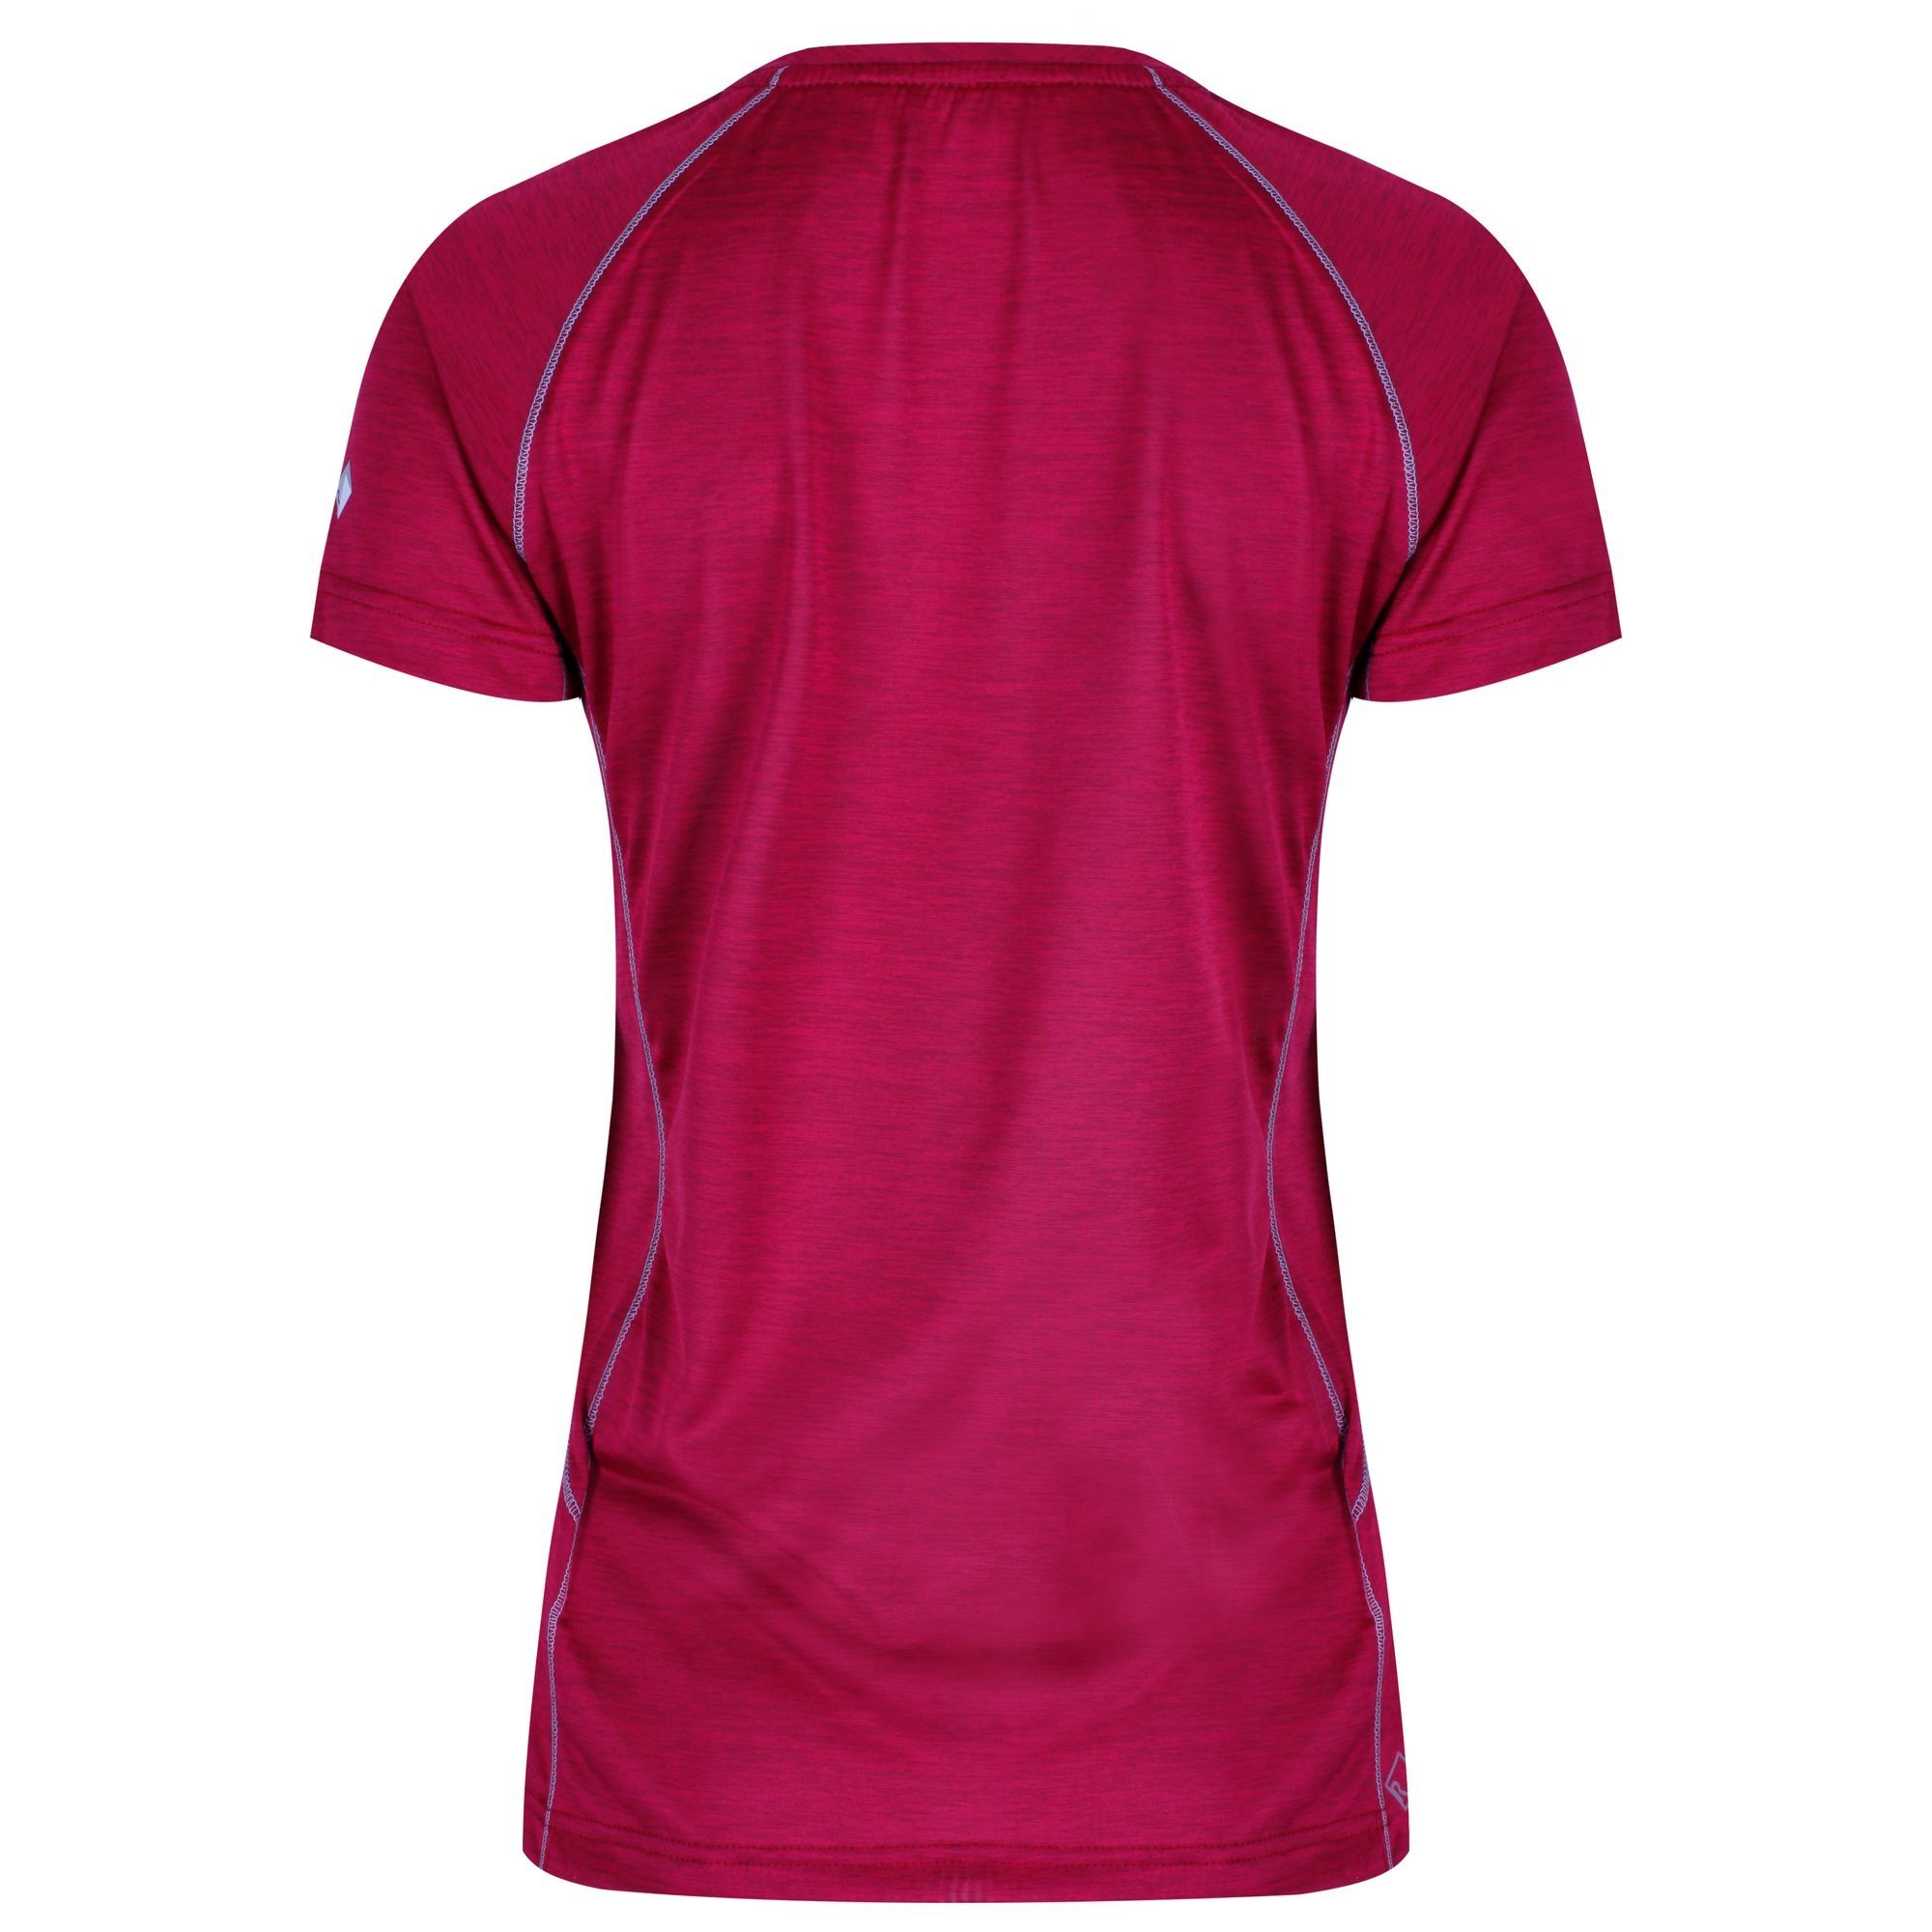 100% quick dry polyester fabric. Nanotex moisture management technology. Fabric stays dry next to skin for reduced chaffing and maximum comfort. Superior wicking performance. With pack-friendly offset shoulder seams.